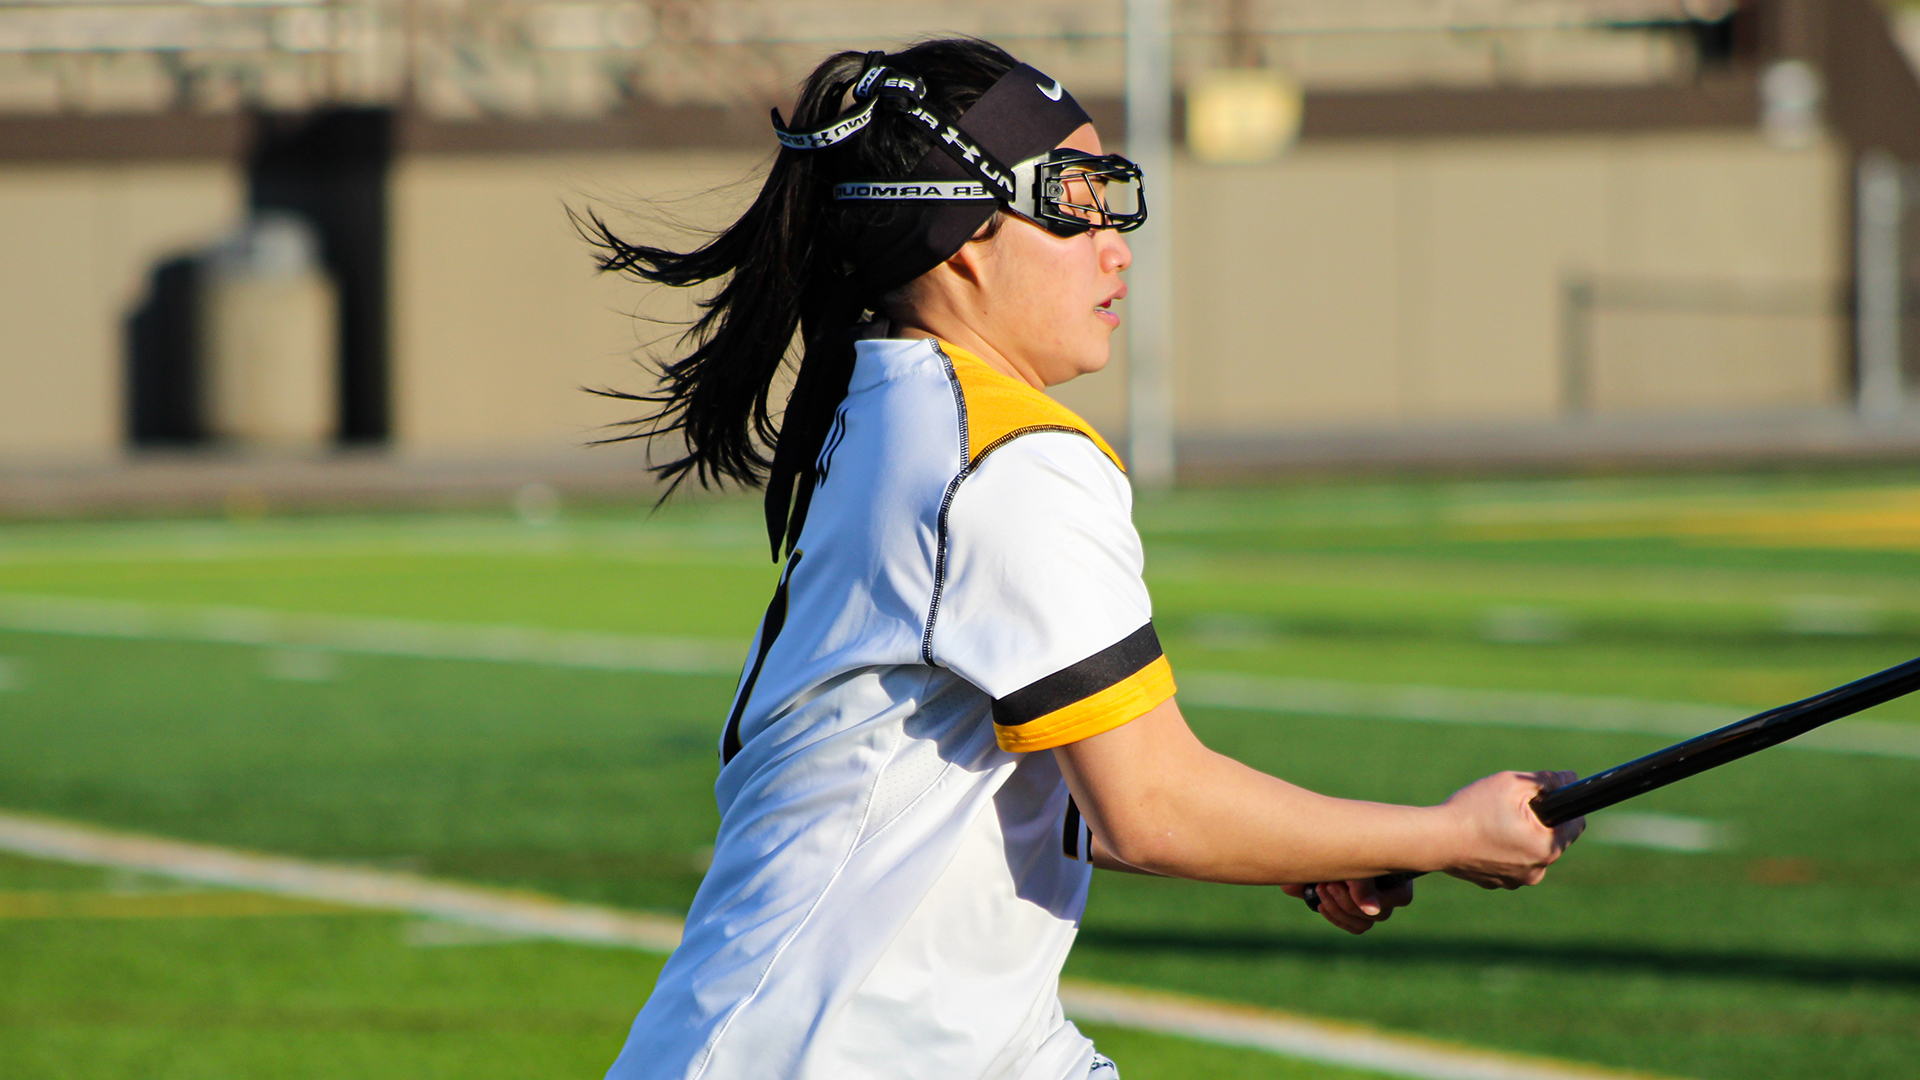 Anna Truong, Wooster Lacrosse